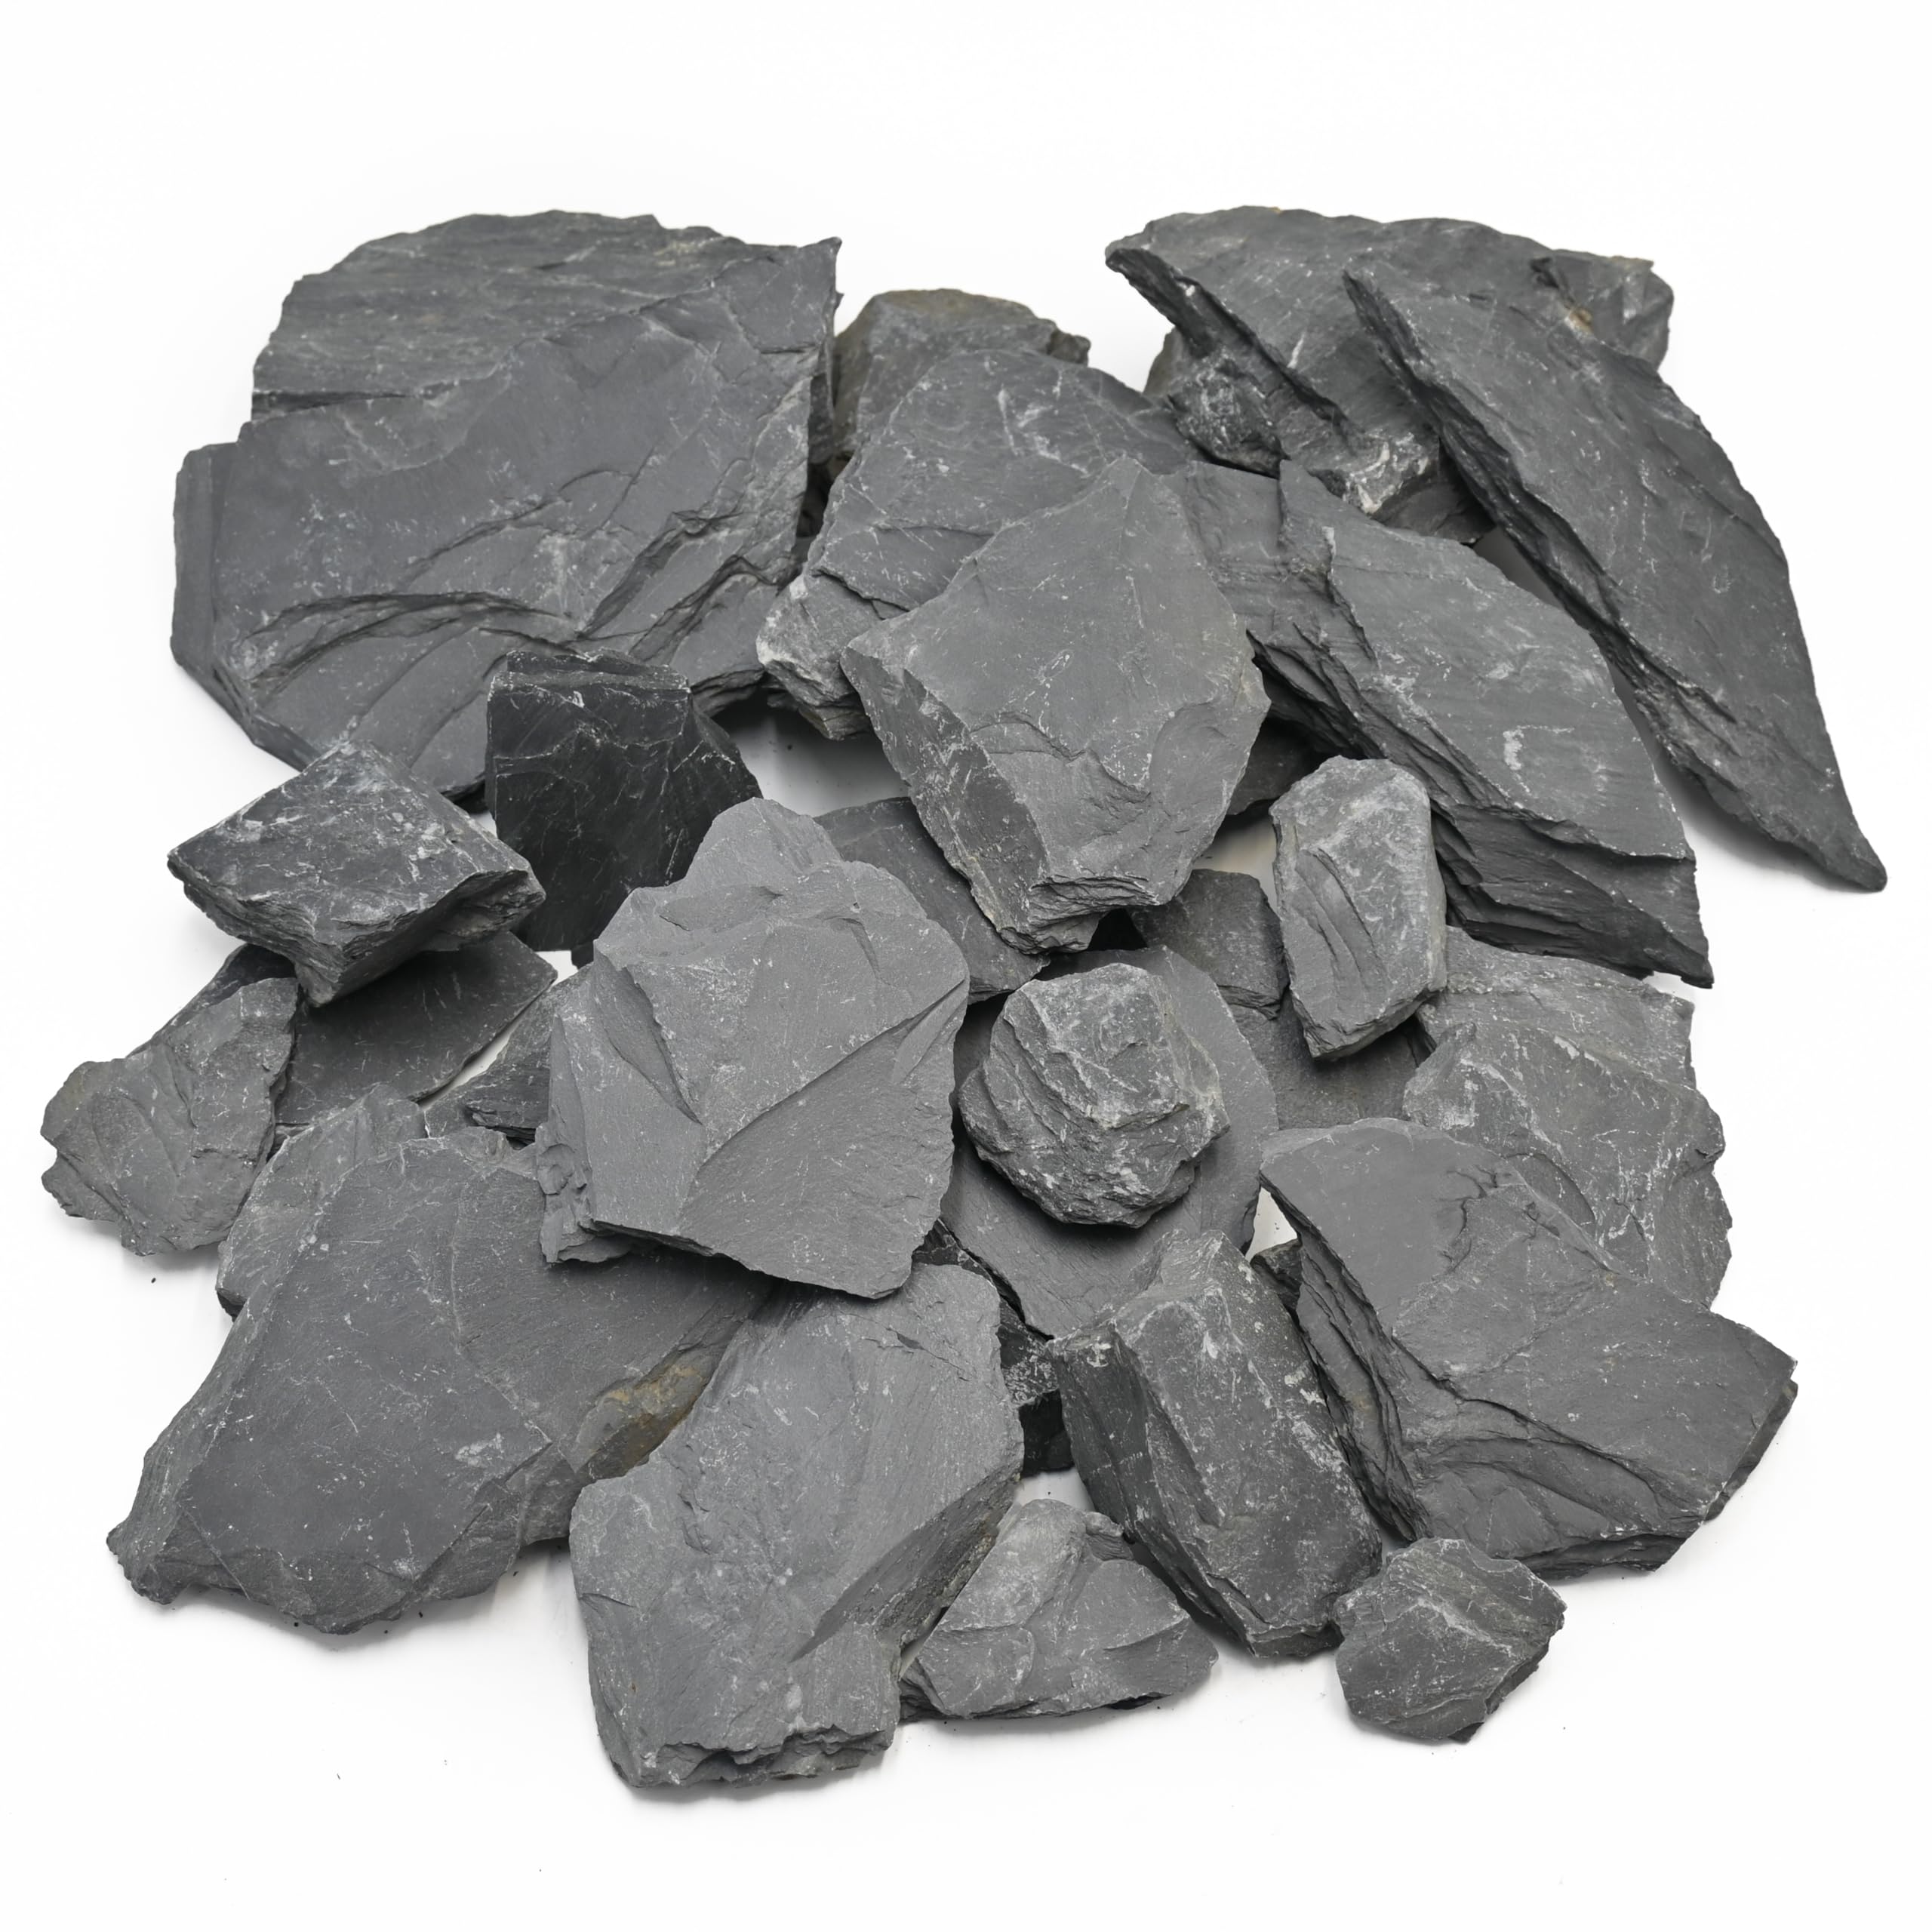 Review of Natural Slate Rock – Ideal for Aquariums, Gardens, and Enclosures